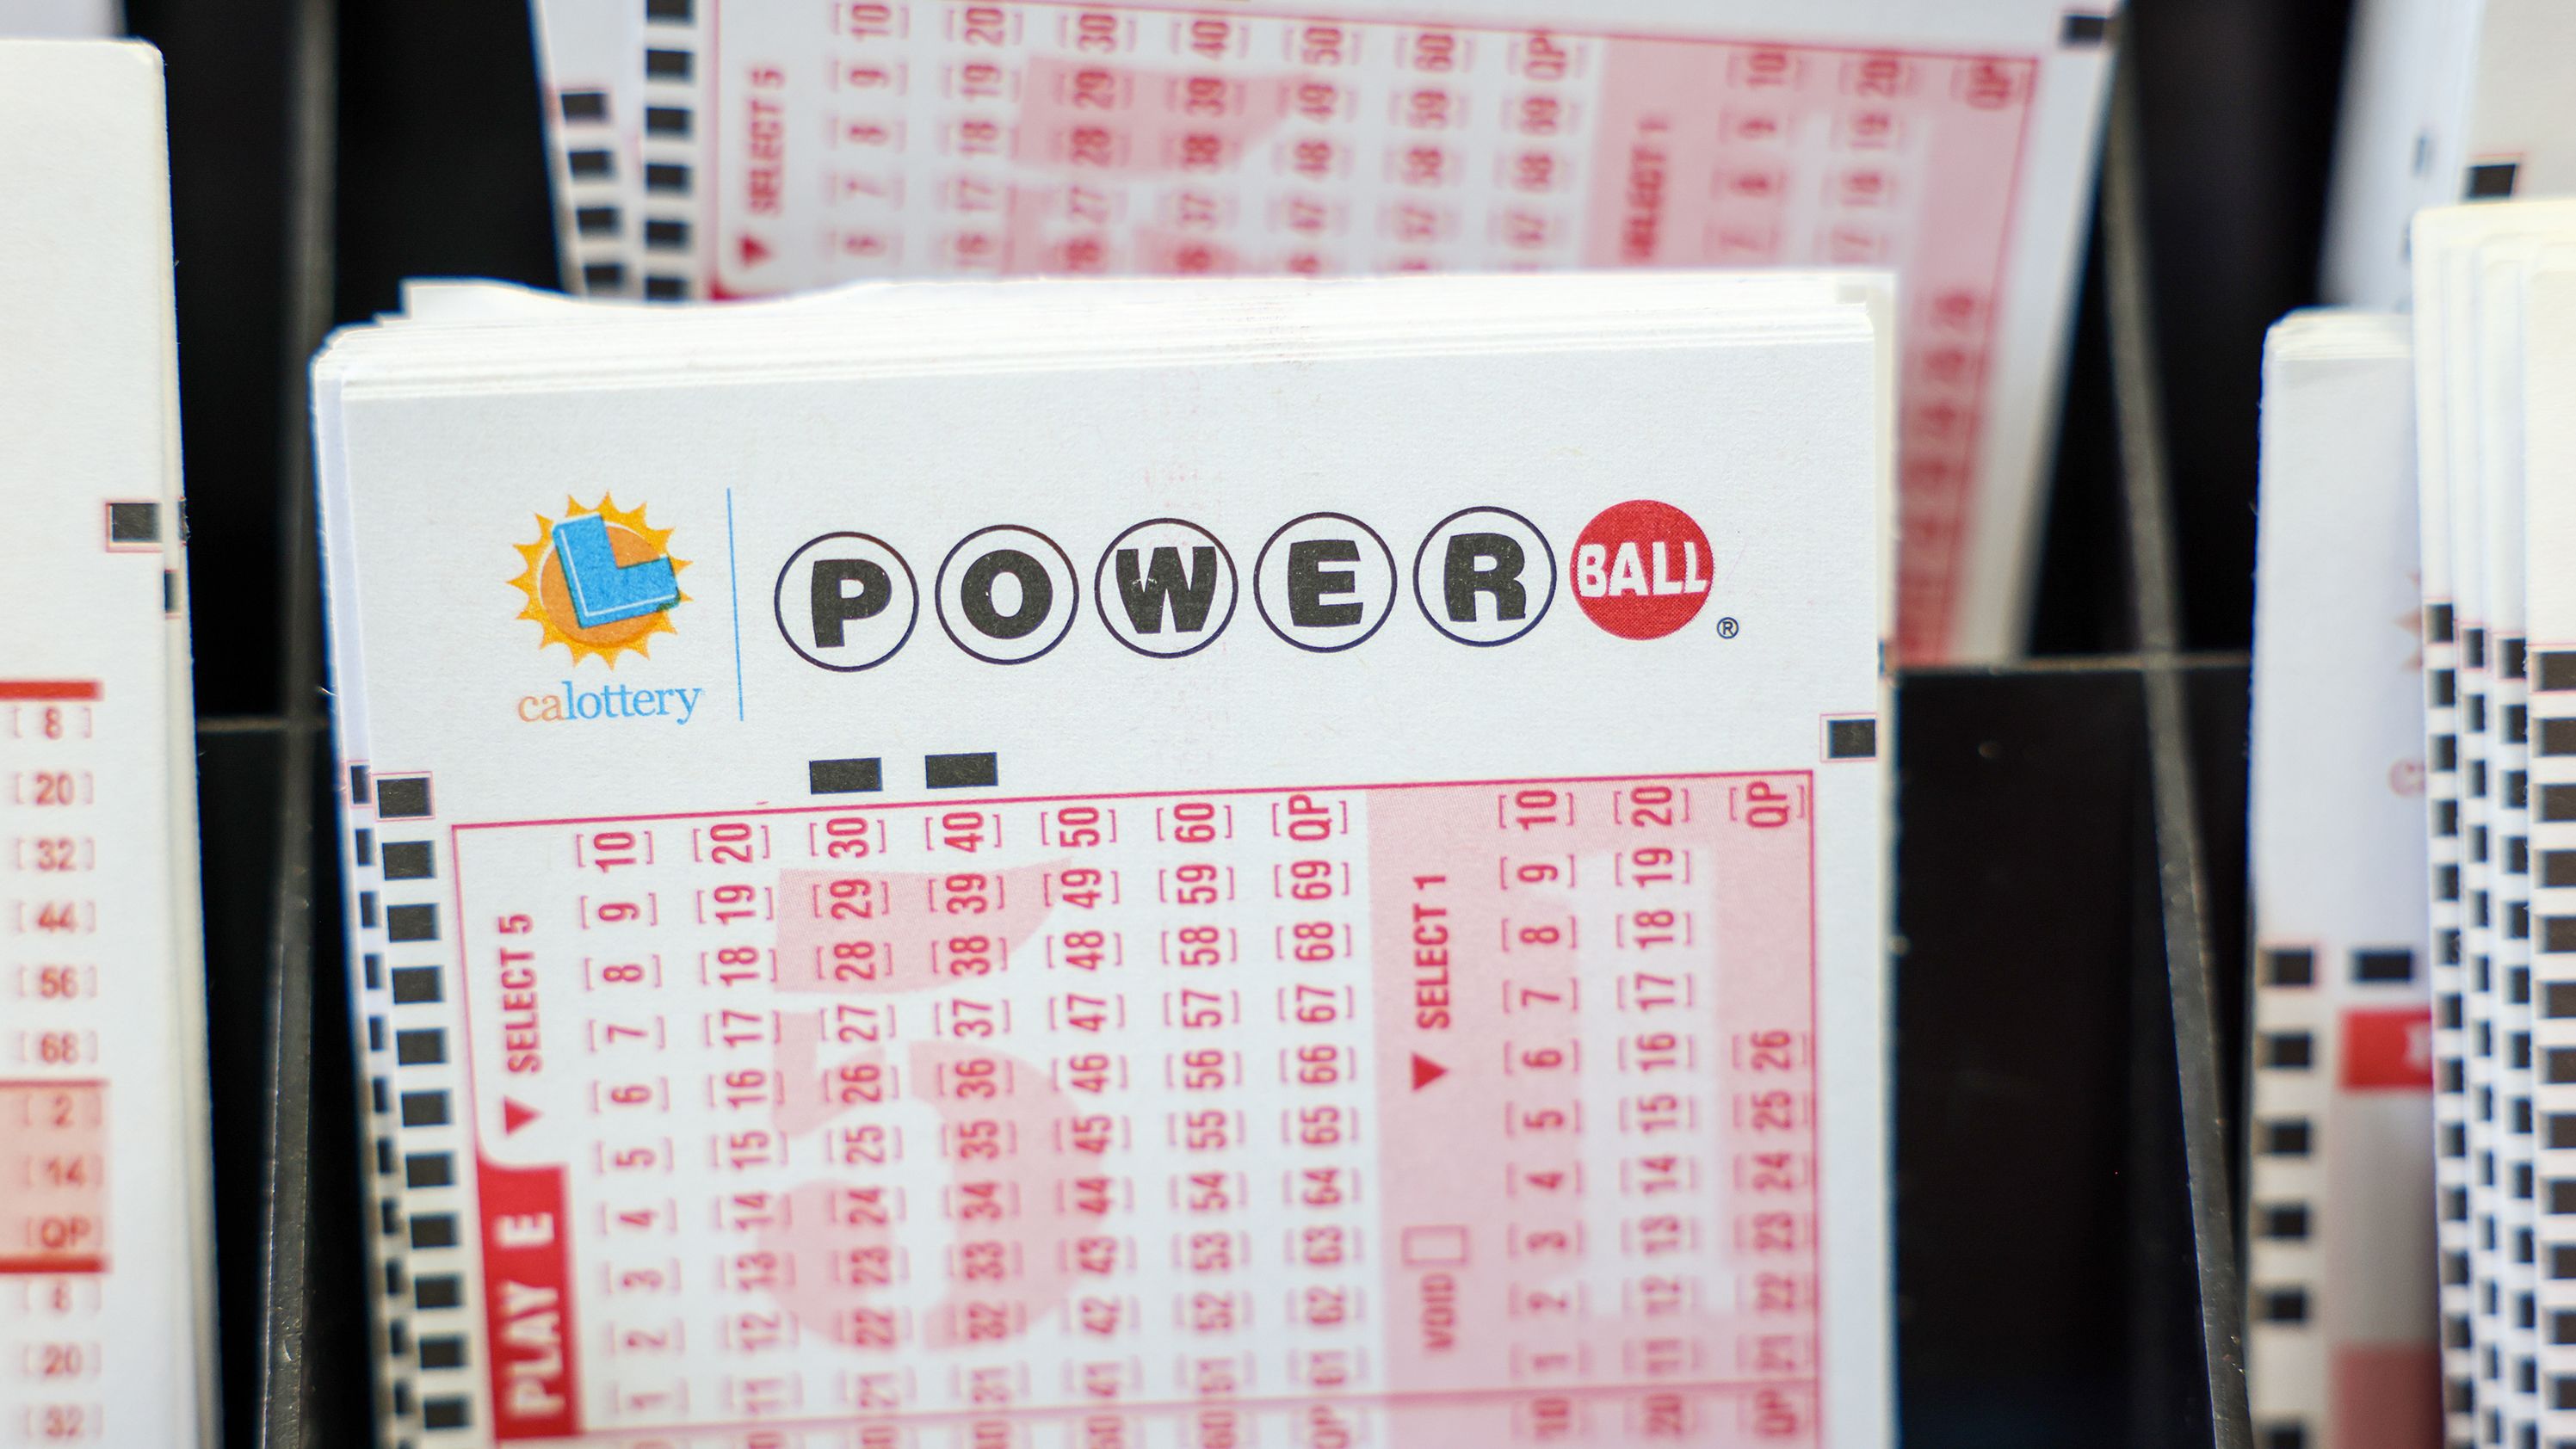 Powerball play tickets on display at Blue Bird Liquor in Hawthorne, CA, Tuesday, Oct. 10, 2023. The estimated jackpot for tonight's Powerball drawing is $1.73 Billion.